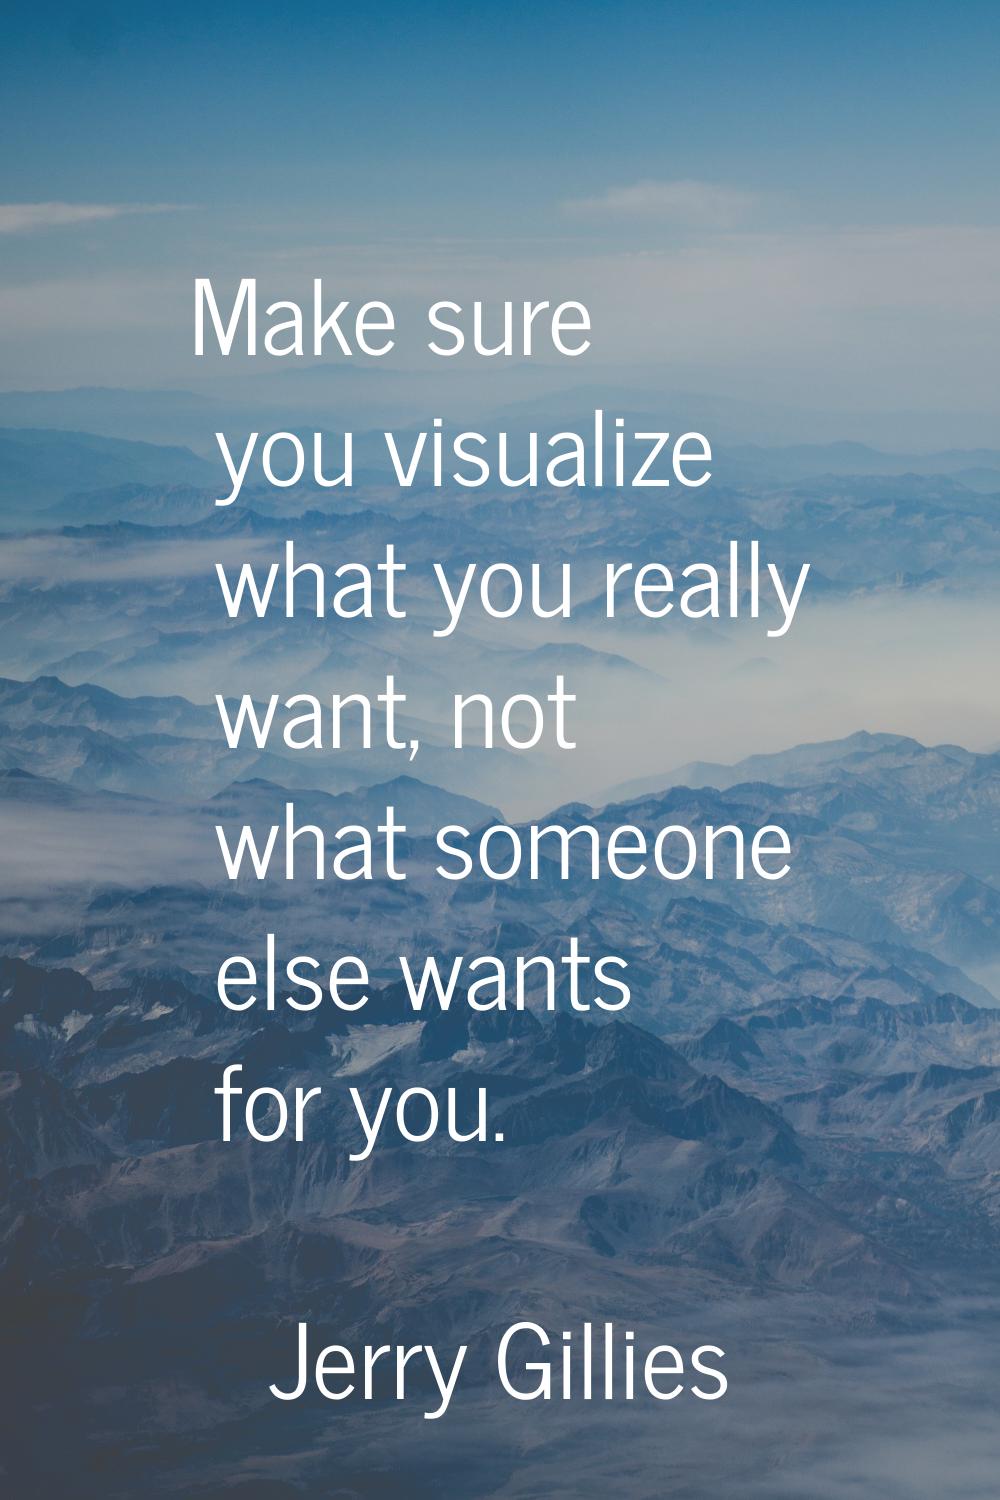 Make sure you visualize what you really want, not what someone else wants for you.